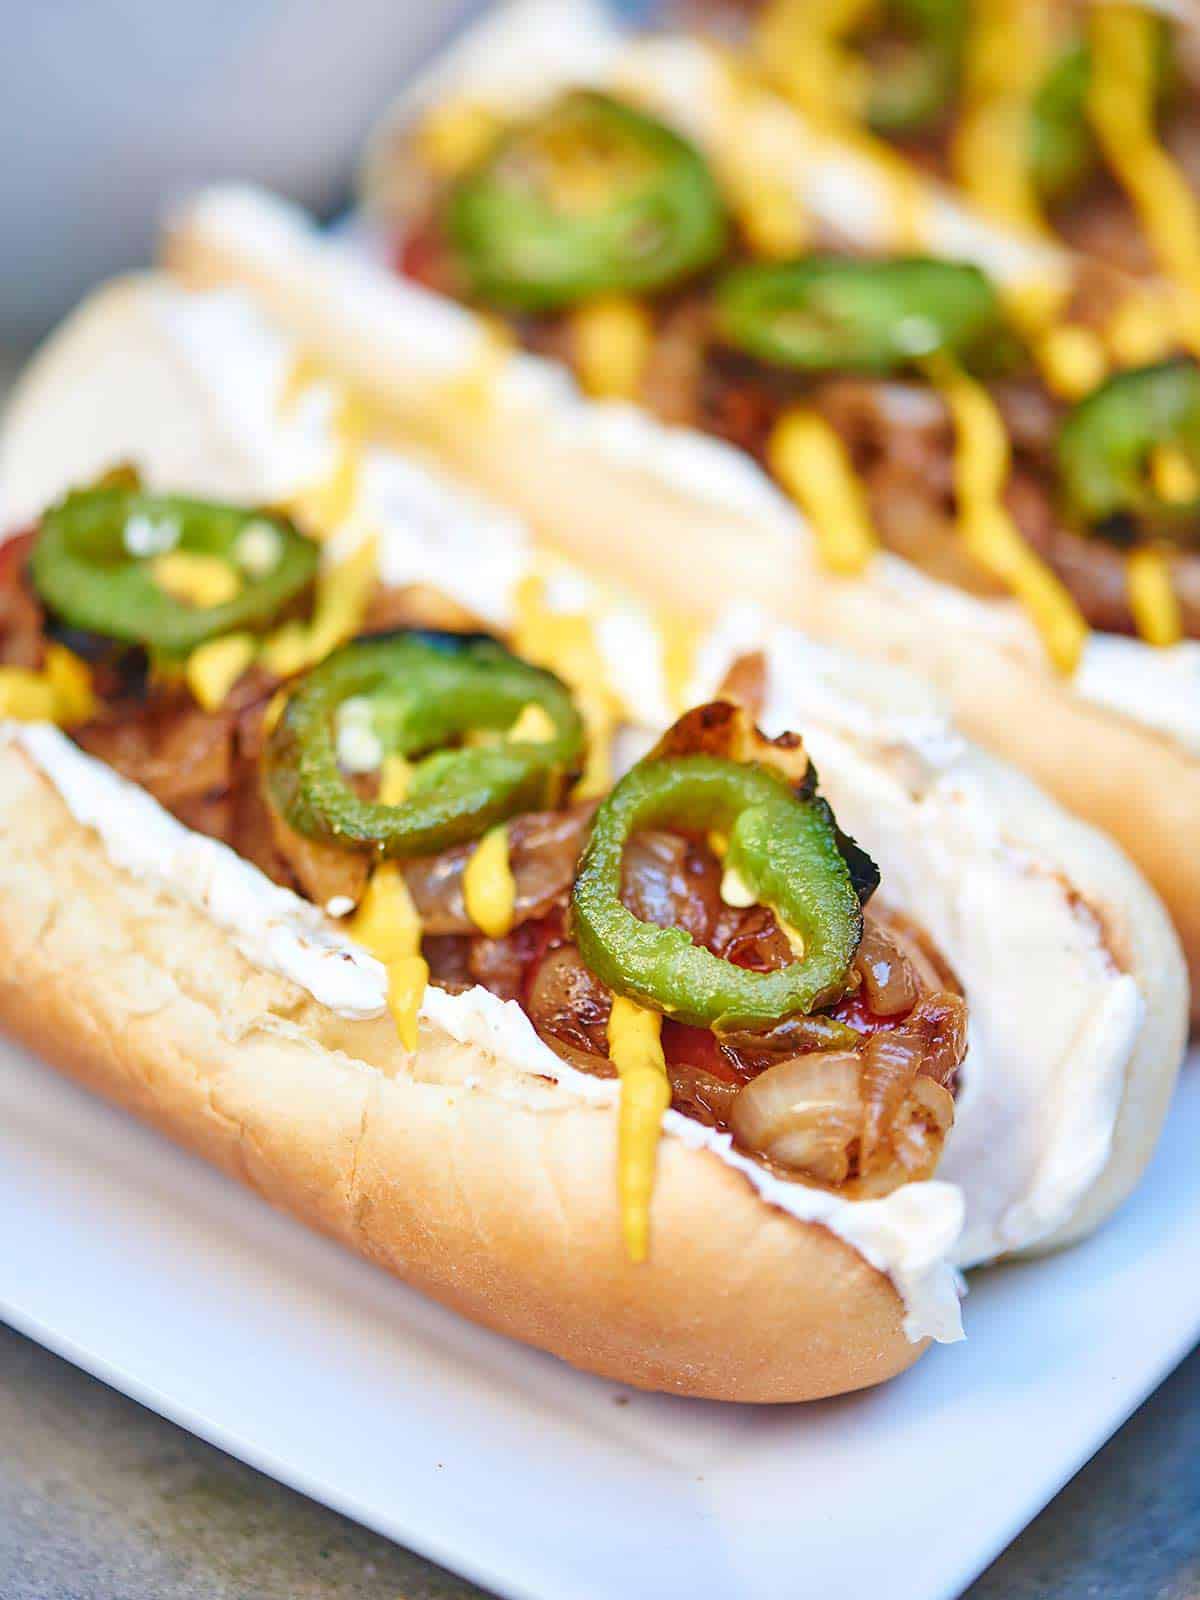 Seattle Hot Dog Recipe - w/ Bacon Cream Cheese & Chips